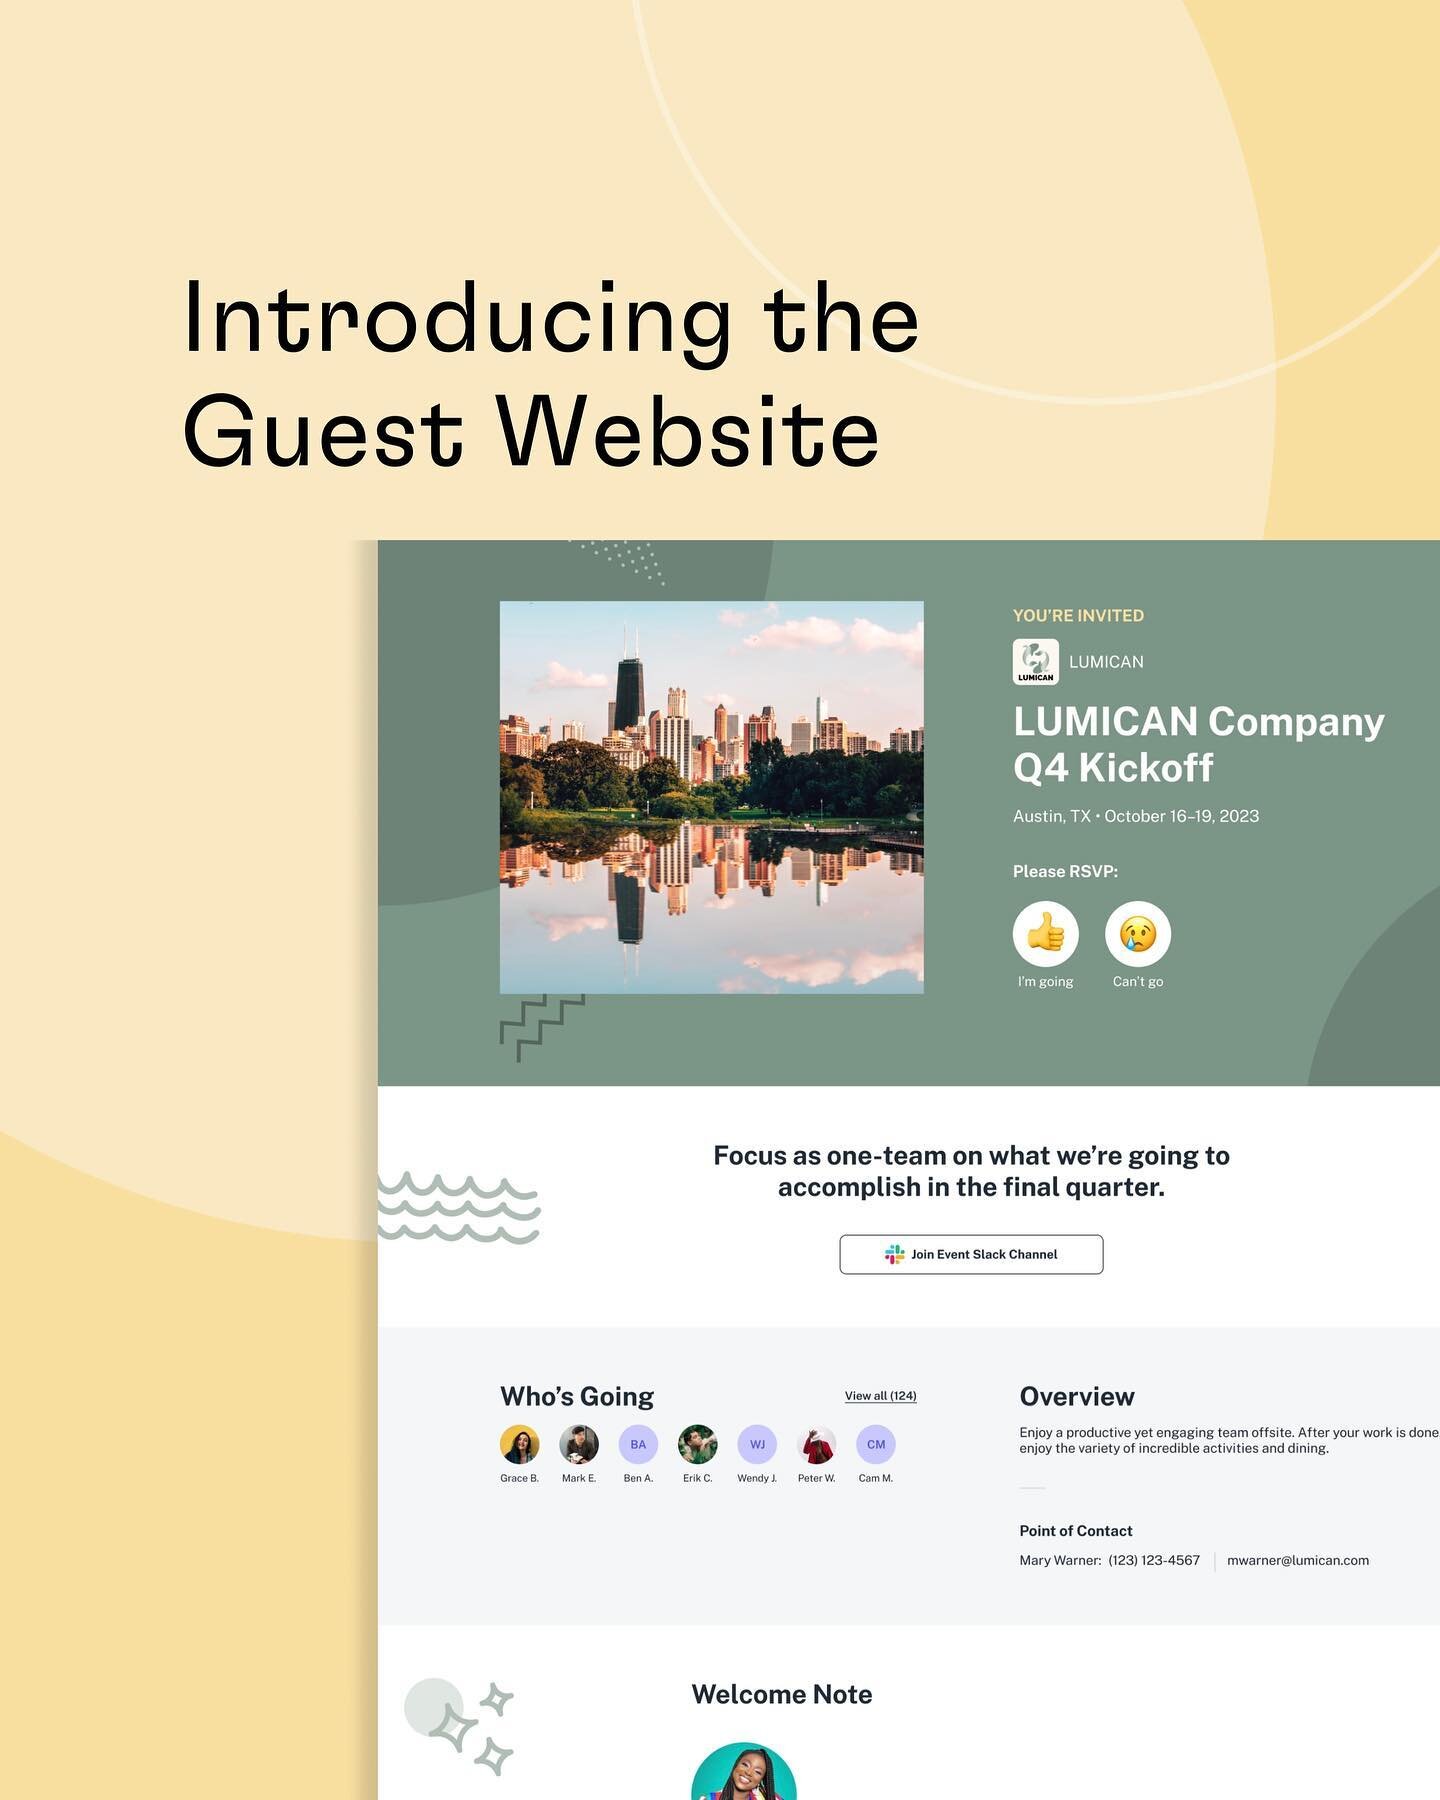 With BoomPop&rsquo;s Guest Websites, attendees can seamlessly RSVP and view essential information about the event. 

Get started planning your event with BoomPop ✨